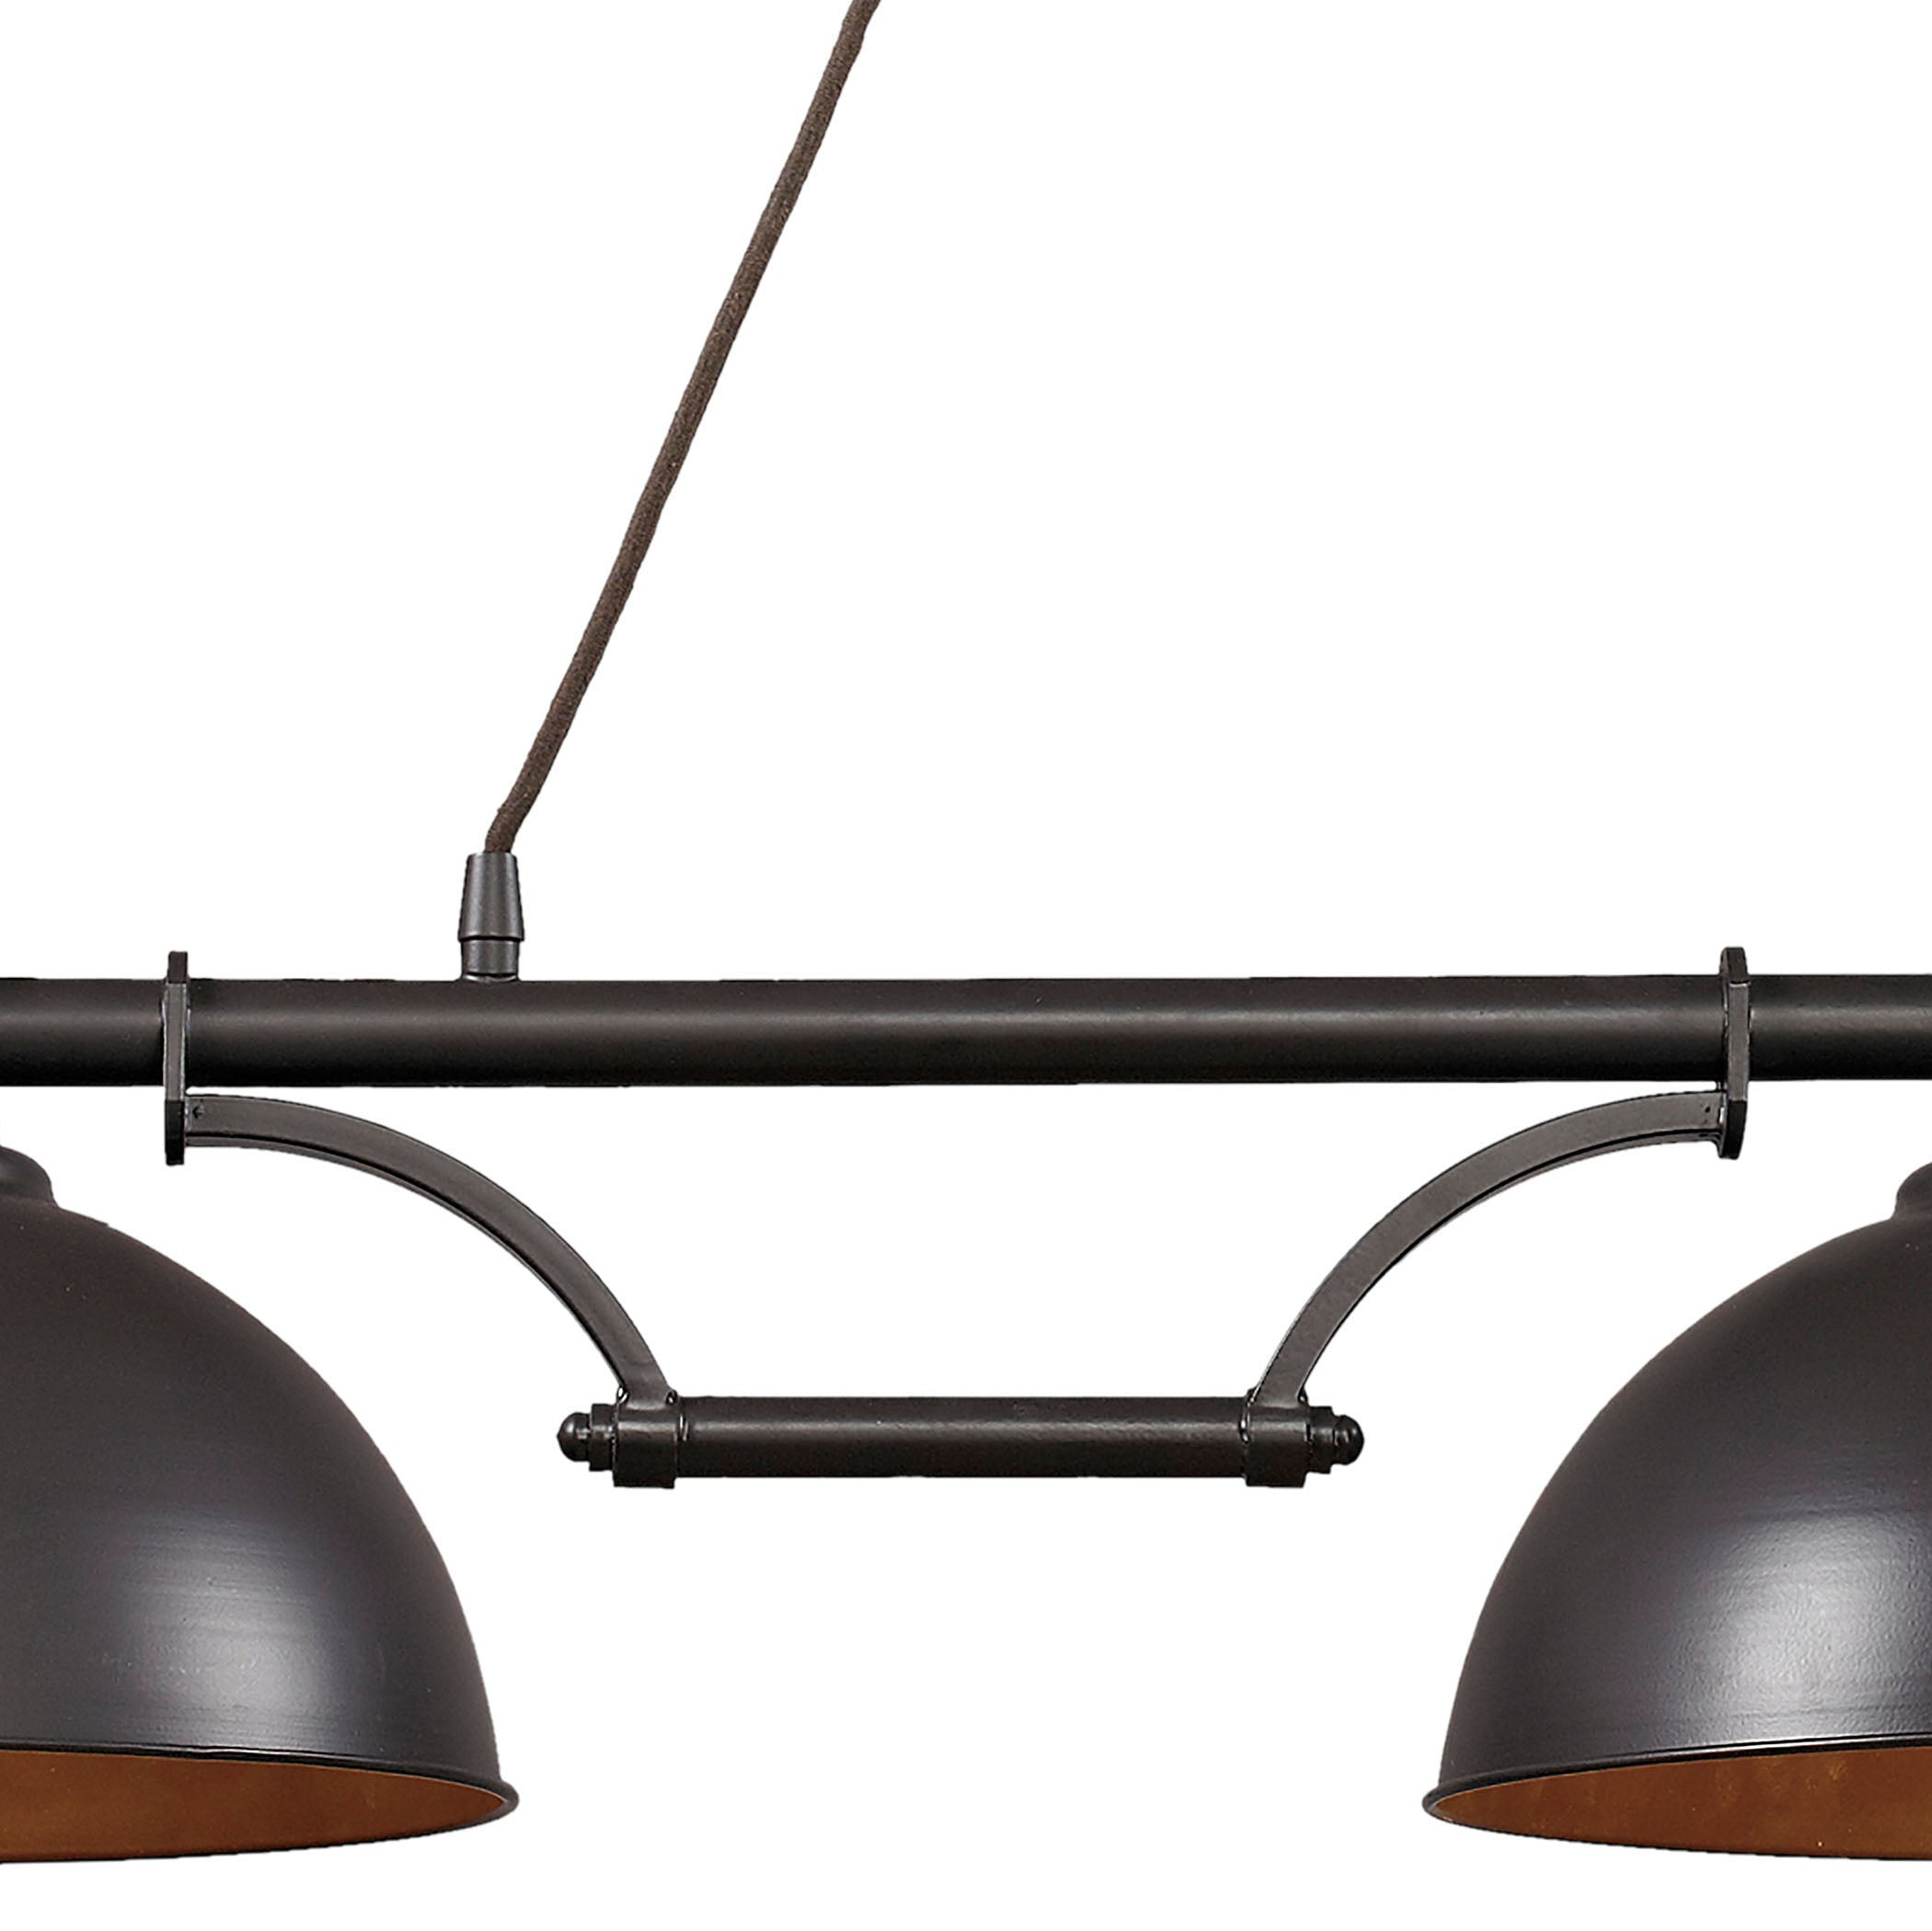 ELK Lighting 65151-3 Farmhouse 3-Light Island Light in Oiled Bronze with Matching Shade